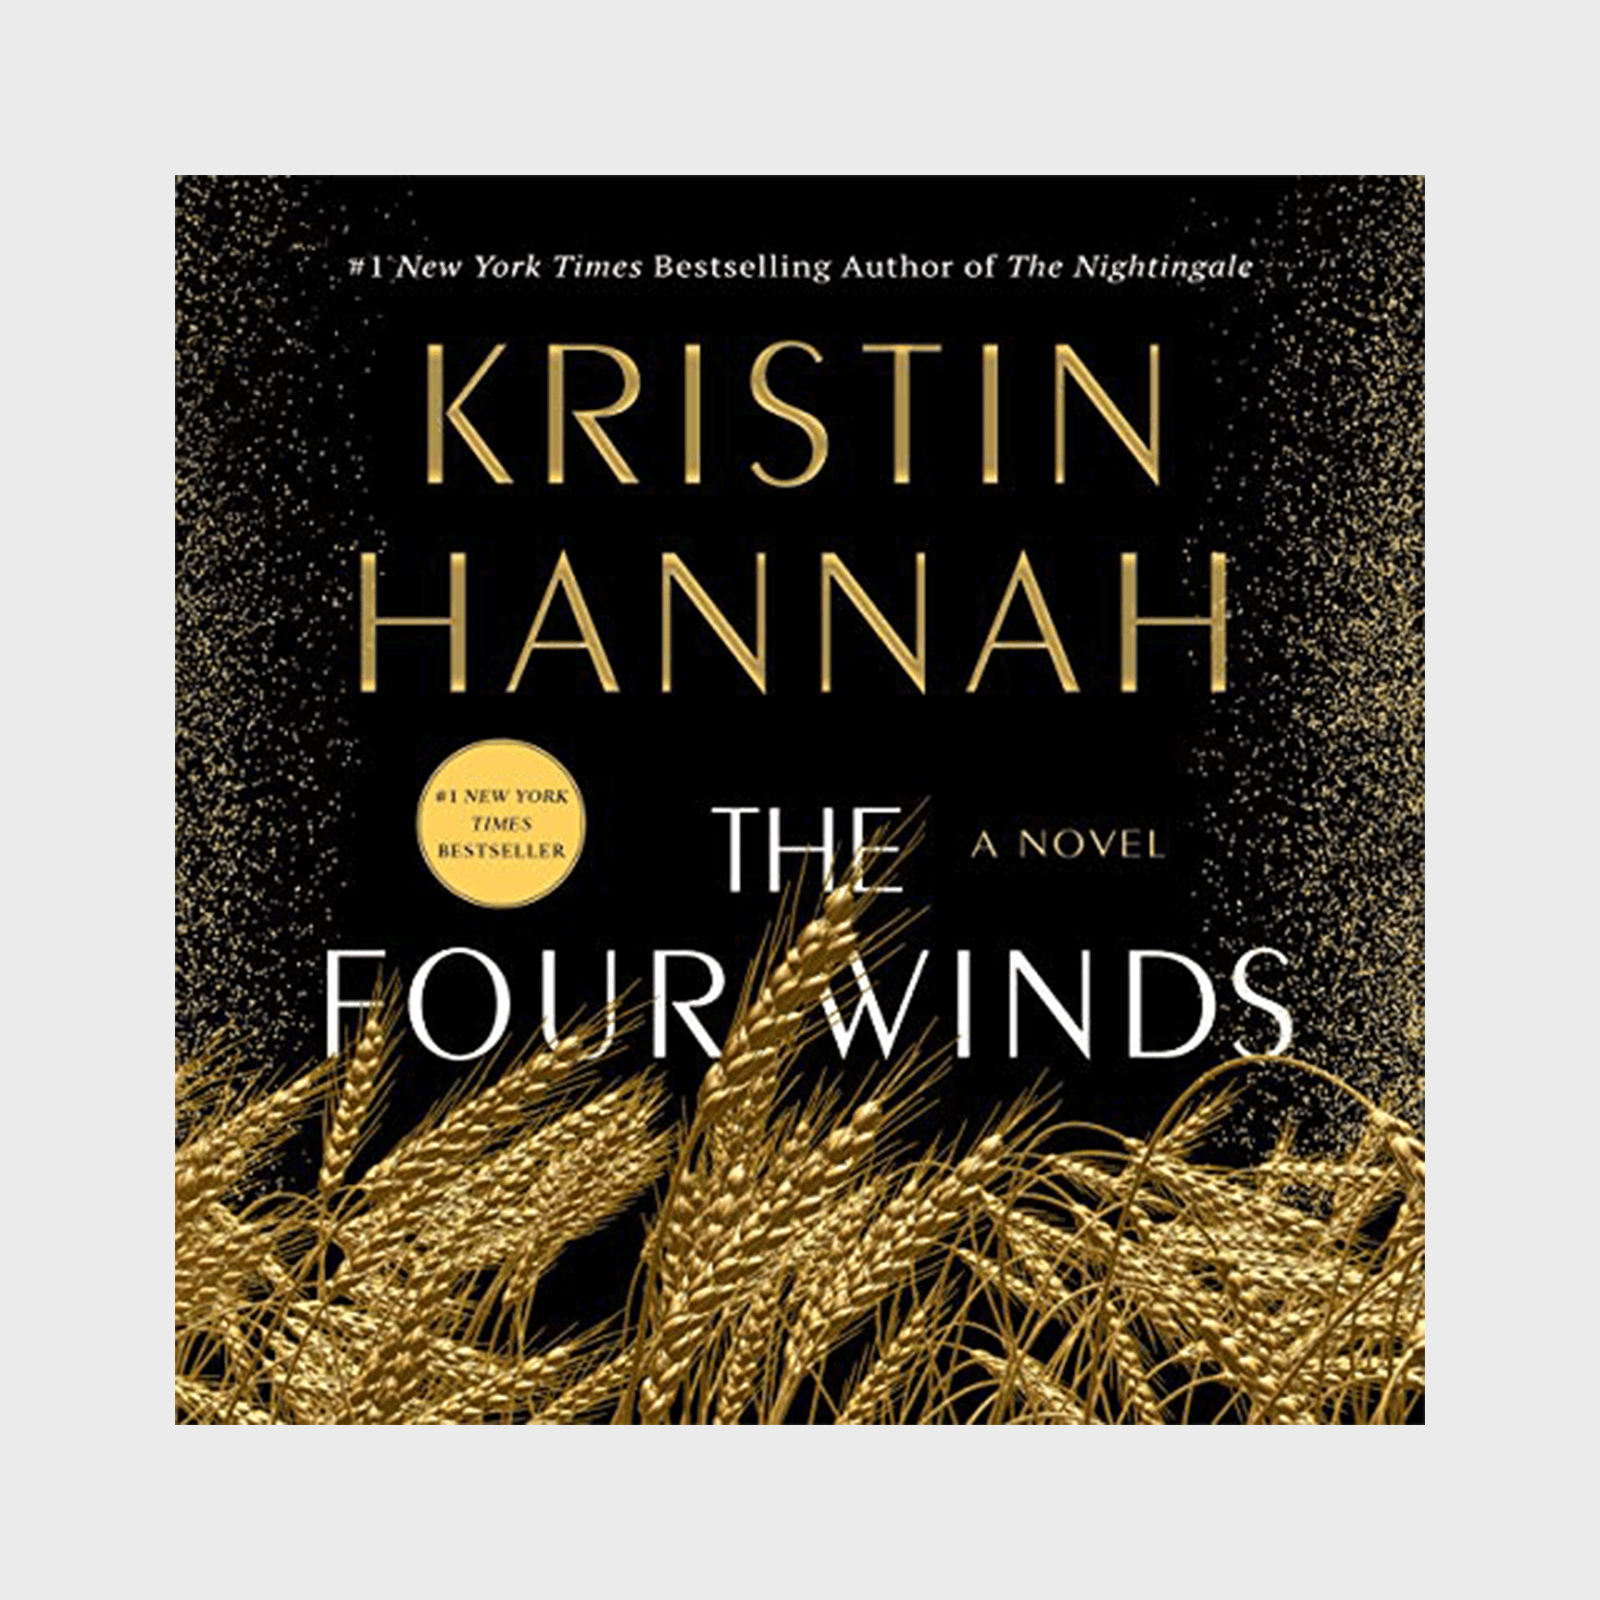 <h3 class=""><strong><em>The Four Winds </em>by Kristin Hannah</strong></h3> <p>Author Kristin Hannah has written some of the best <a href="https://www.rd.com/list/historical-fiction-books/" rel="noopener noreferrer">historical fiction books</a> of all time, and now she has one of the best audiobooks as well. Her latest novel, <a href="https://www.amazon.com/The-Four-Winds-A-Novel/dp/B0882VNQKS/" rel="noopener noreferrer"><em>The Four Winds</em></a>, takes you back to the Great Depression of the 1930s, in which Elsa Martinelli discovers the real meaning of love, family, and survival. There's a reason this novel, which was released in February 2021, has been named a number one best seller by the<em> Wall Street Journal, USA Today, </em>and the<em> New York Times</em>.</p> <p class="listicle-page__cta-button-shop"><a class="shop-btn" href="https://www.amazon.com/The-Four-Winds-A-Novel/dp/B0882VNQKS/">Shop Now</a></p>